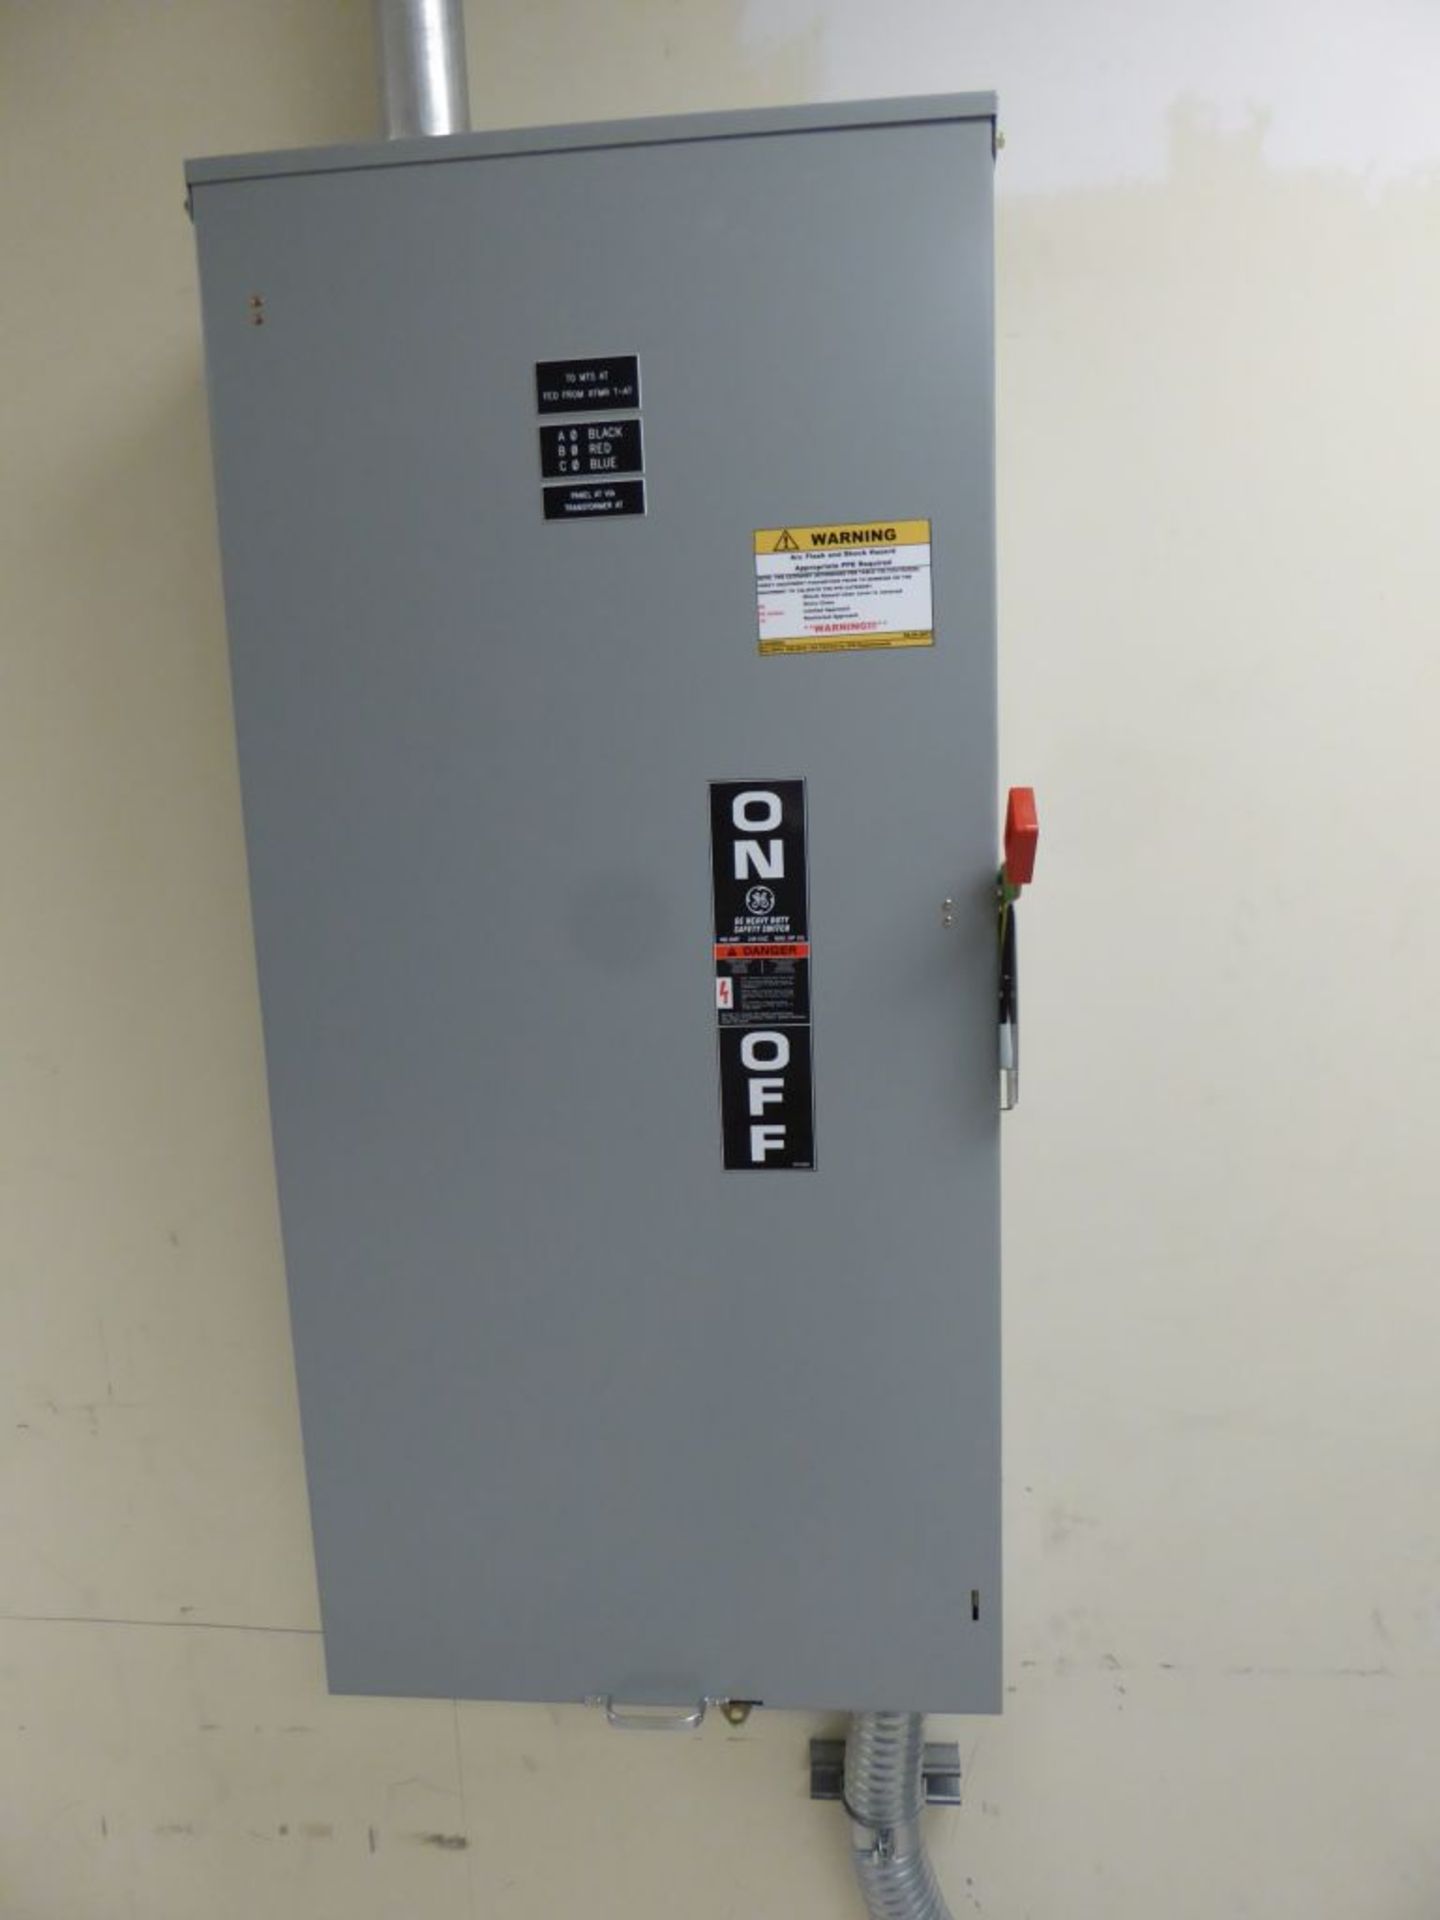 Spartanburg, SC - GE Heavy Duty Safety Switch - Image 2 of 3